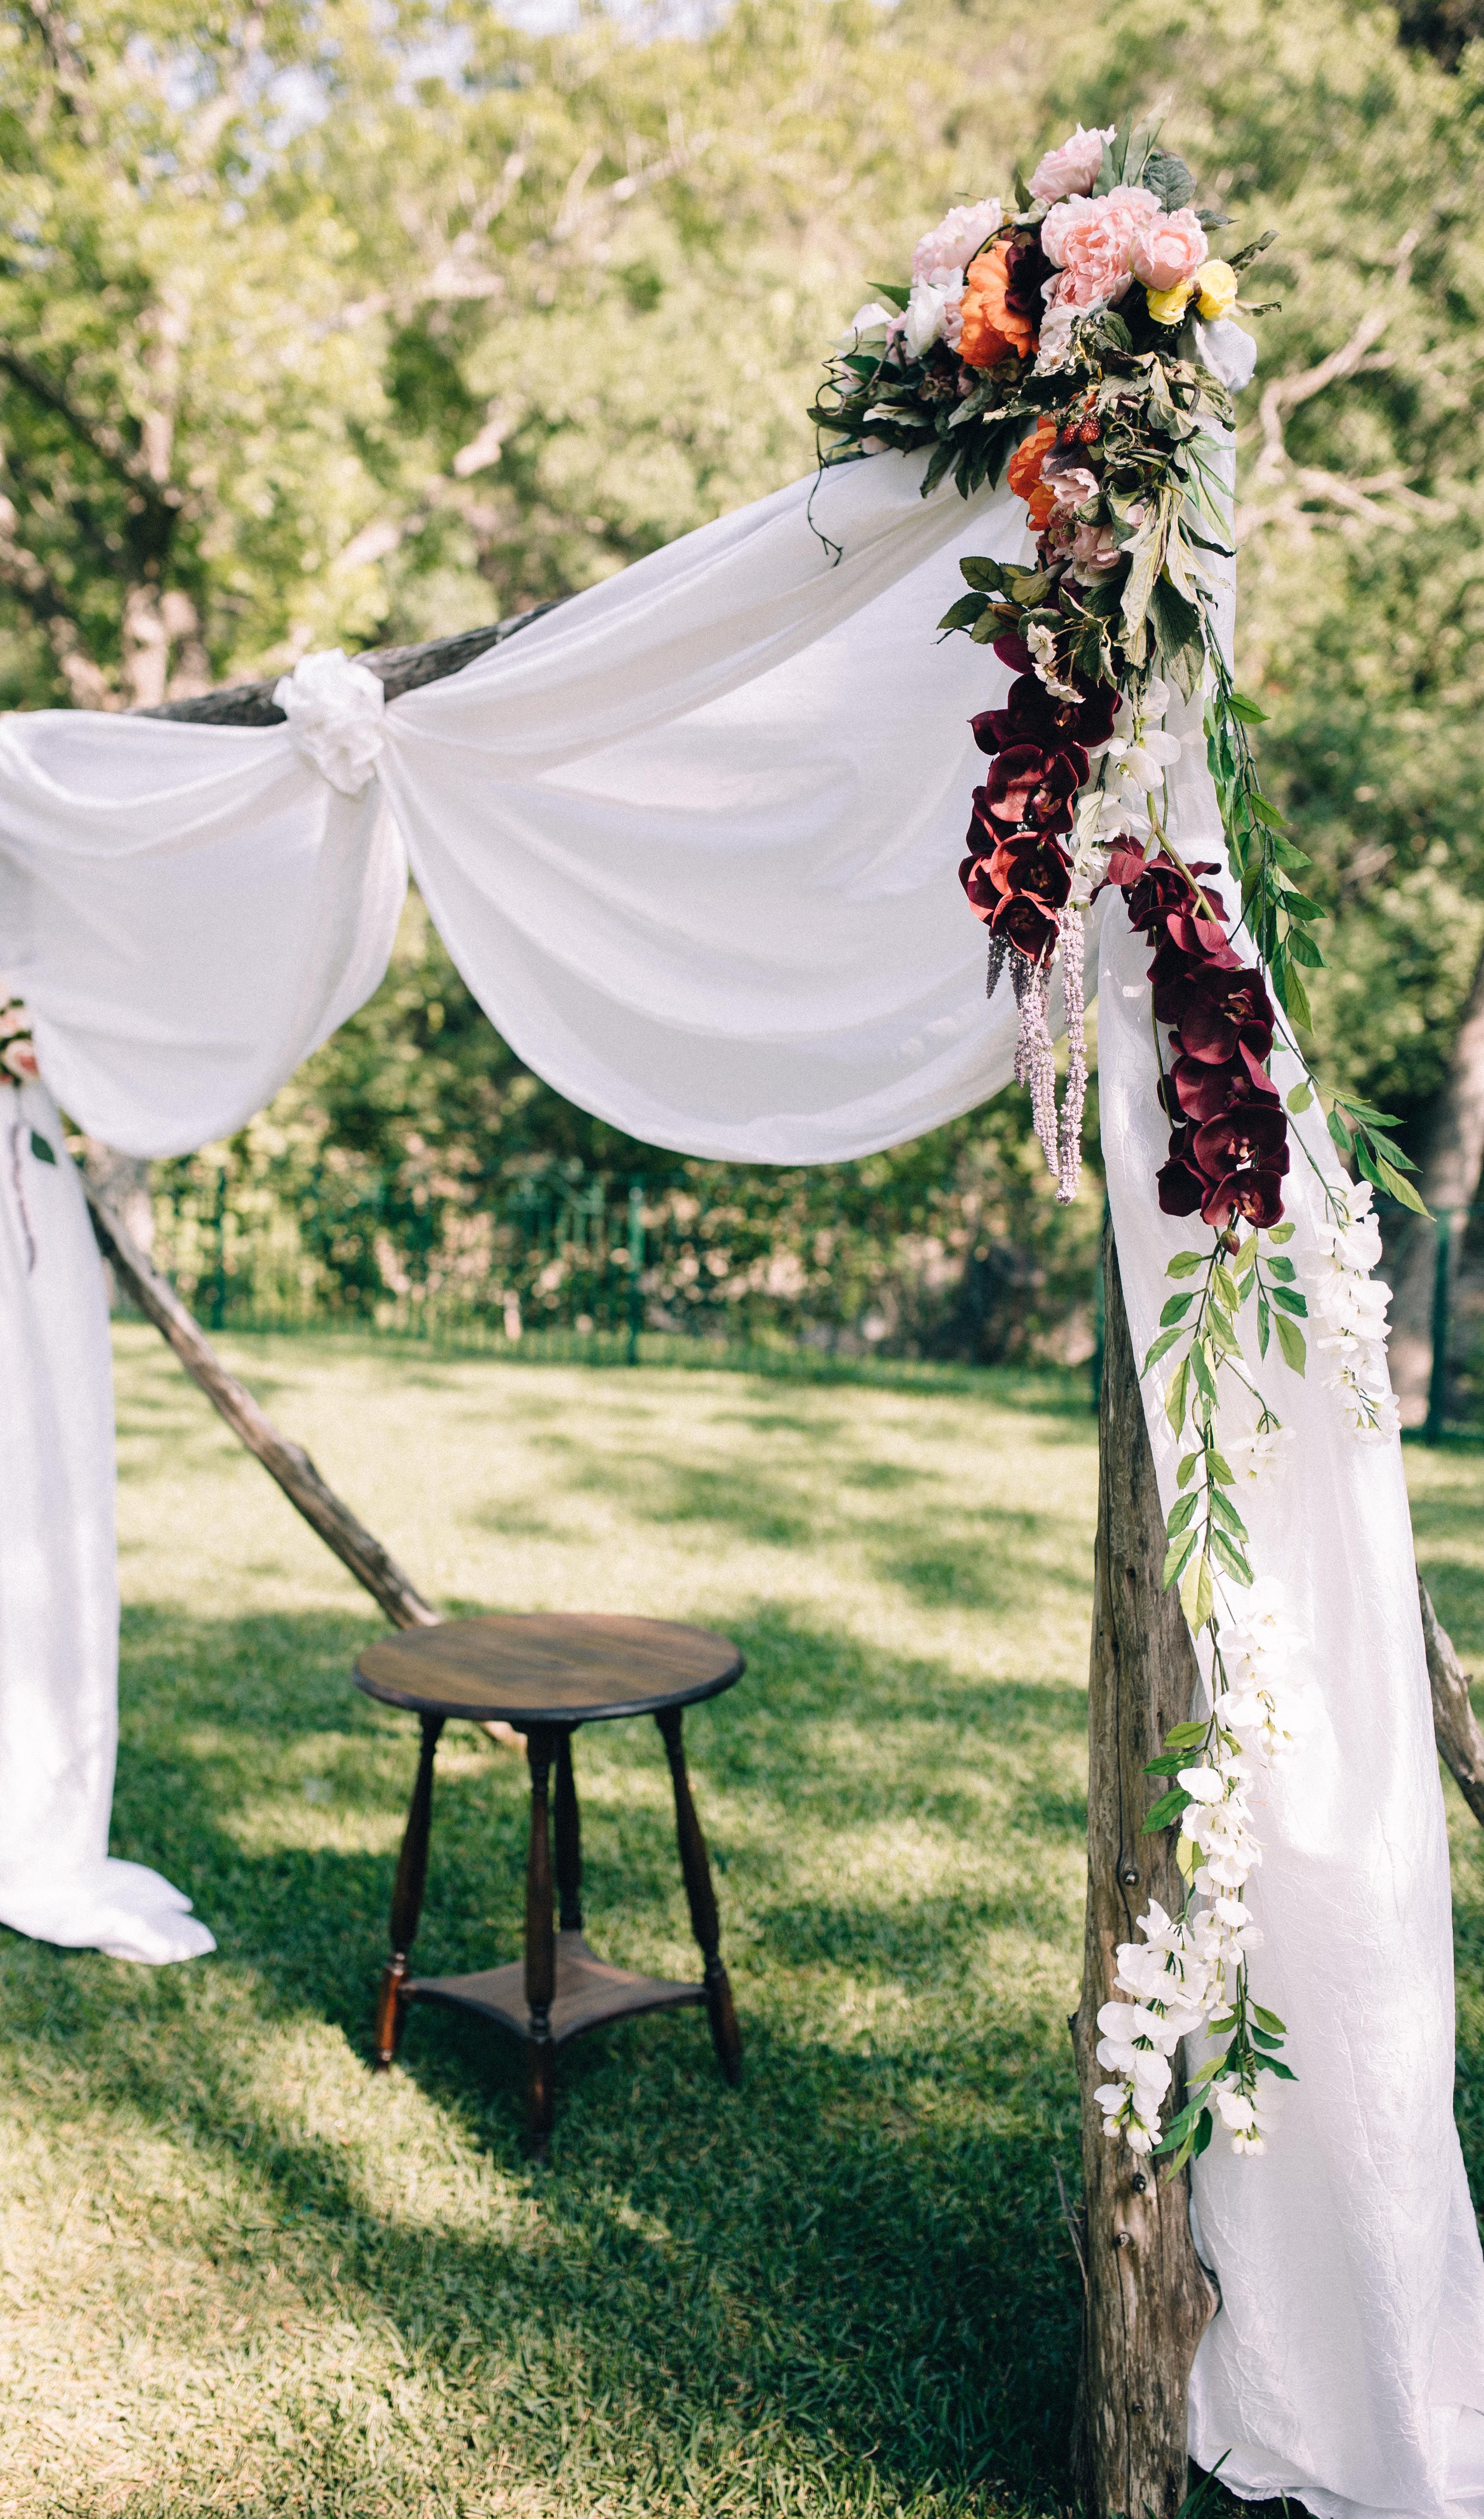 18 Outdoor Wedding Ideas   Decorations for a Fun Outside Spring ...